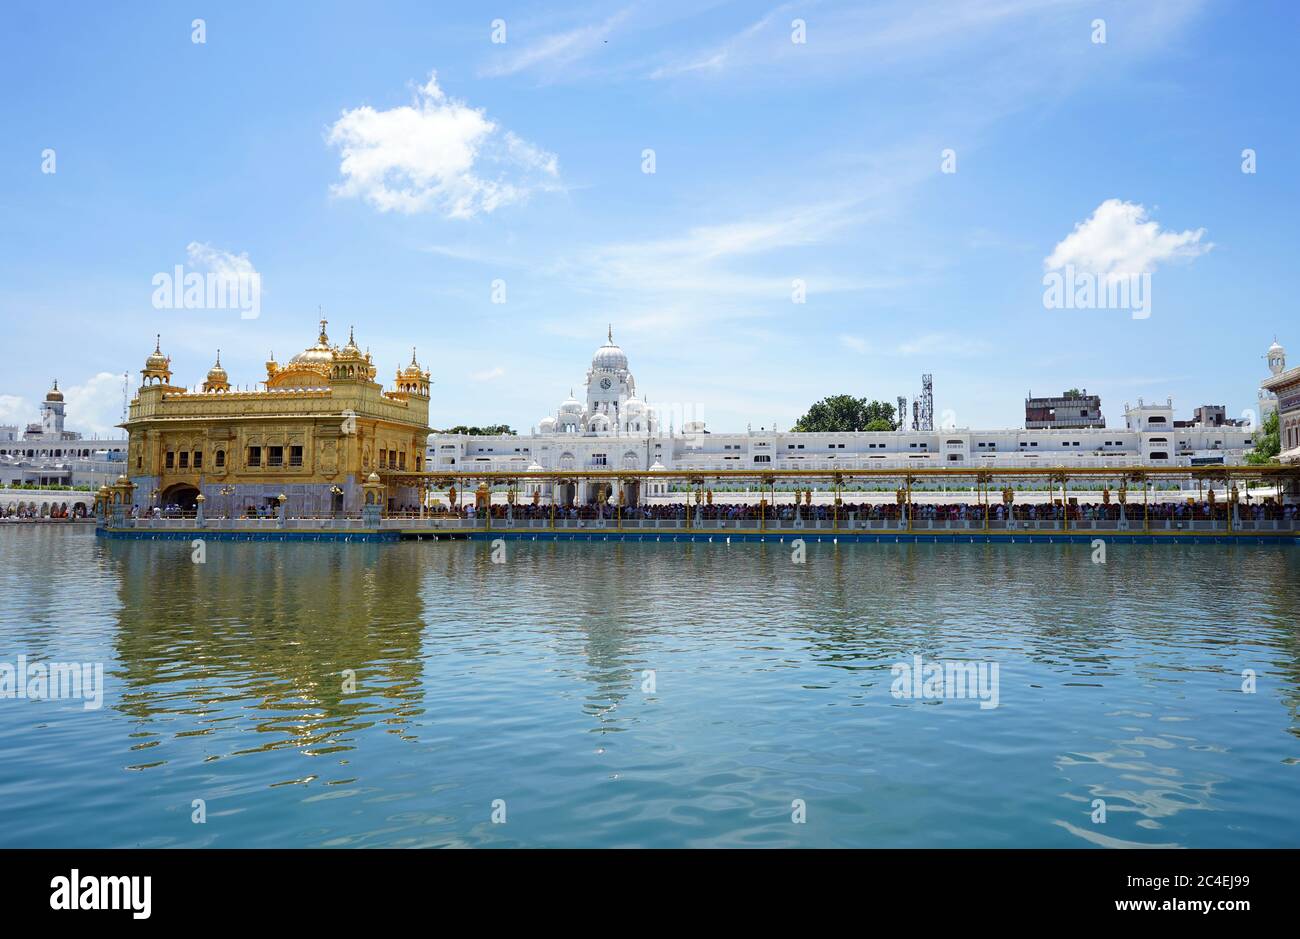 Golden Temple,  Harmandir Sahib Gurdwara, Amritsar, Punjab, India Very Famous Sikh Temple In India Gold Plated Temple In Middle Of the Water Stock Photo